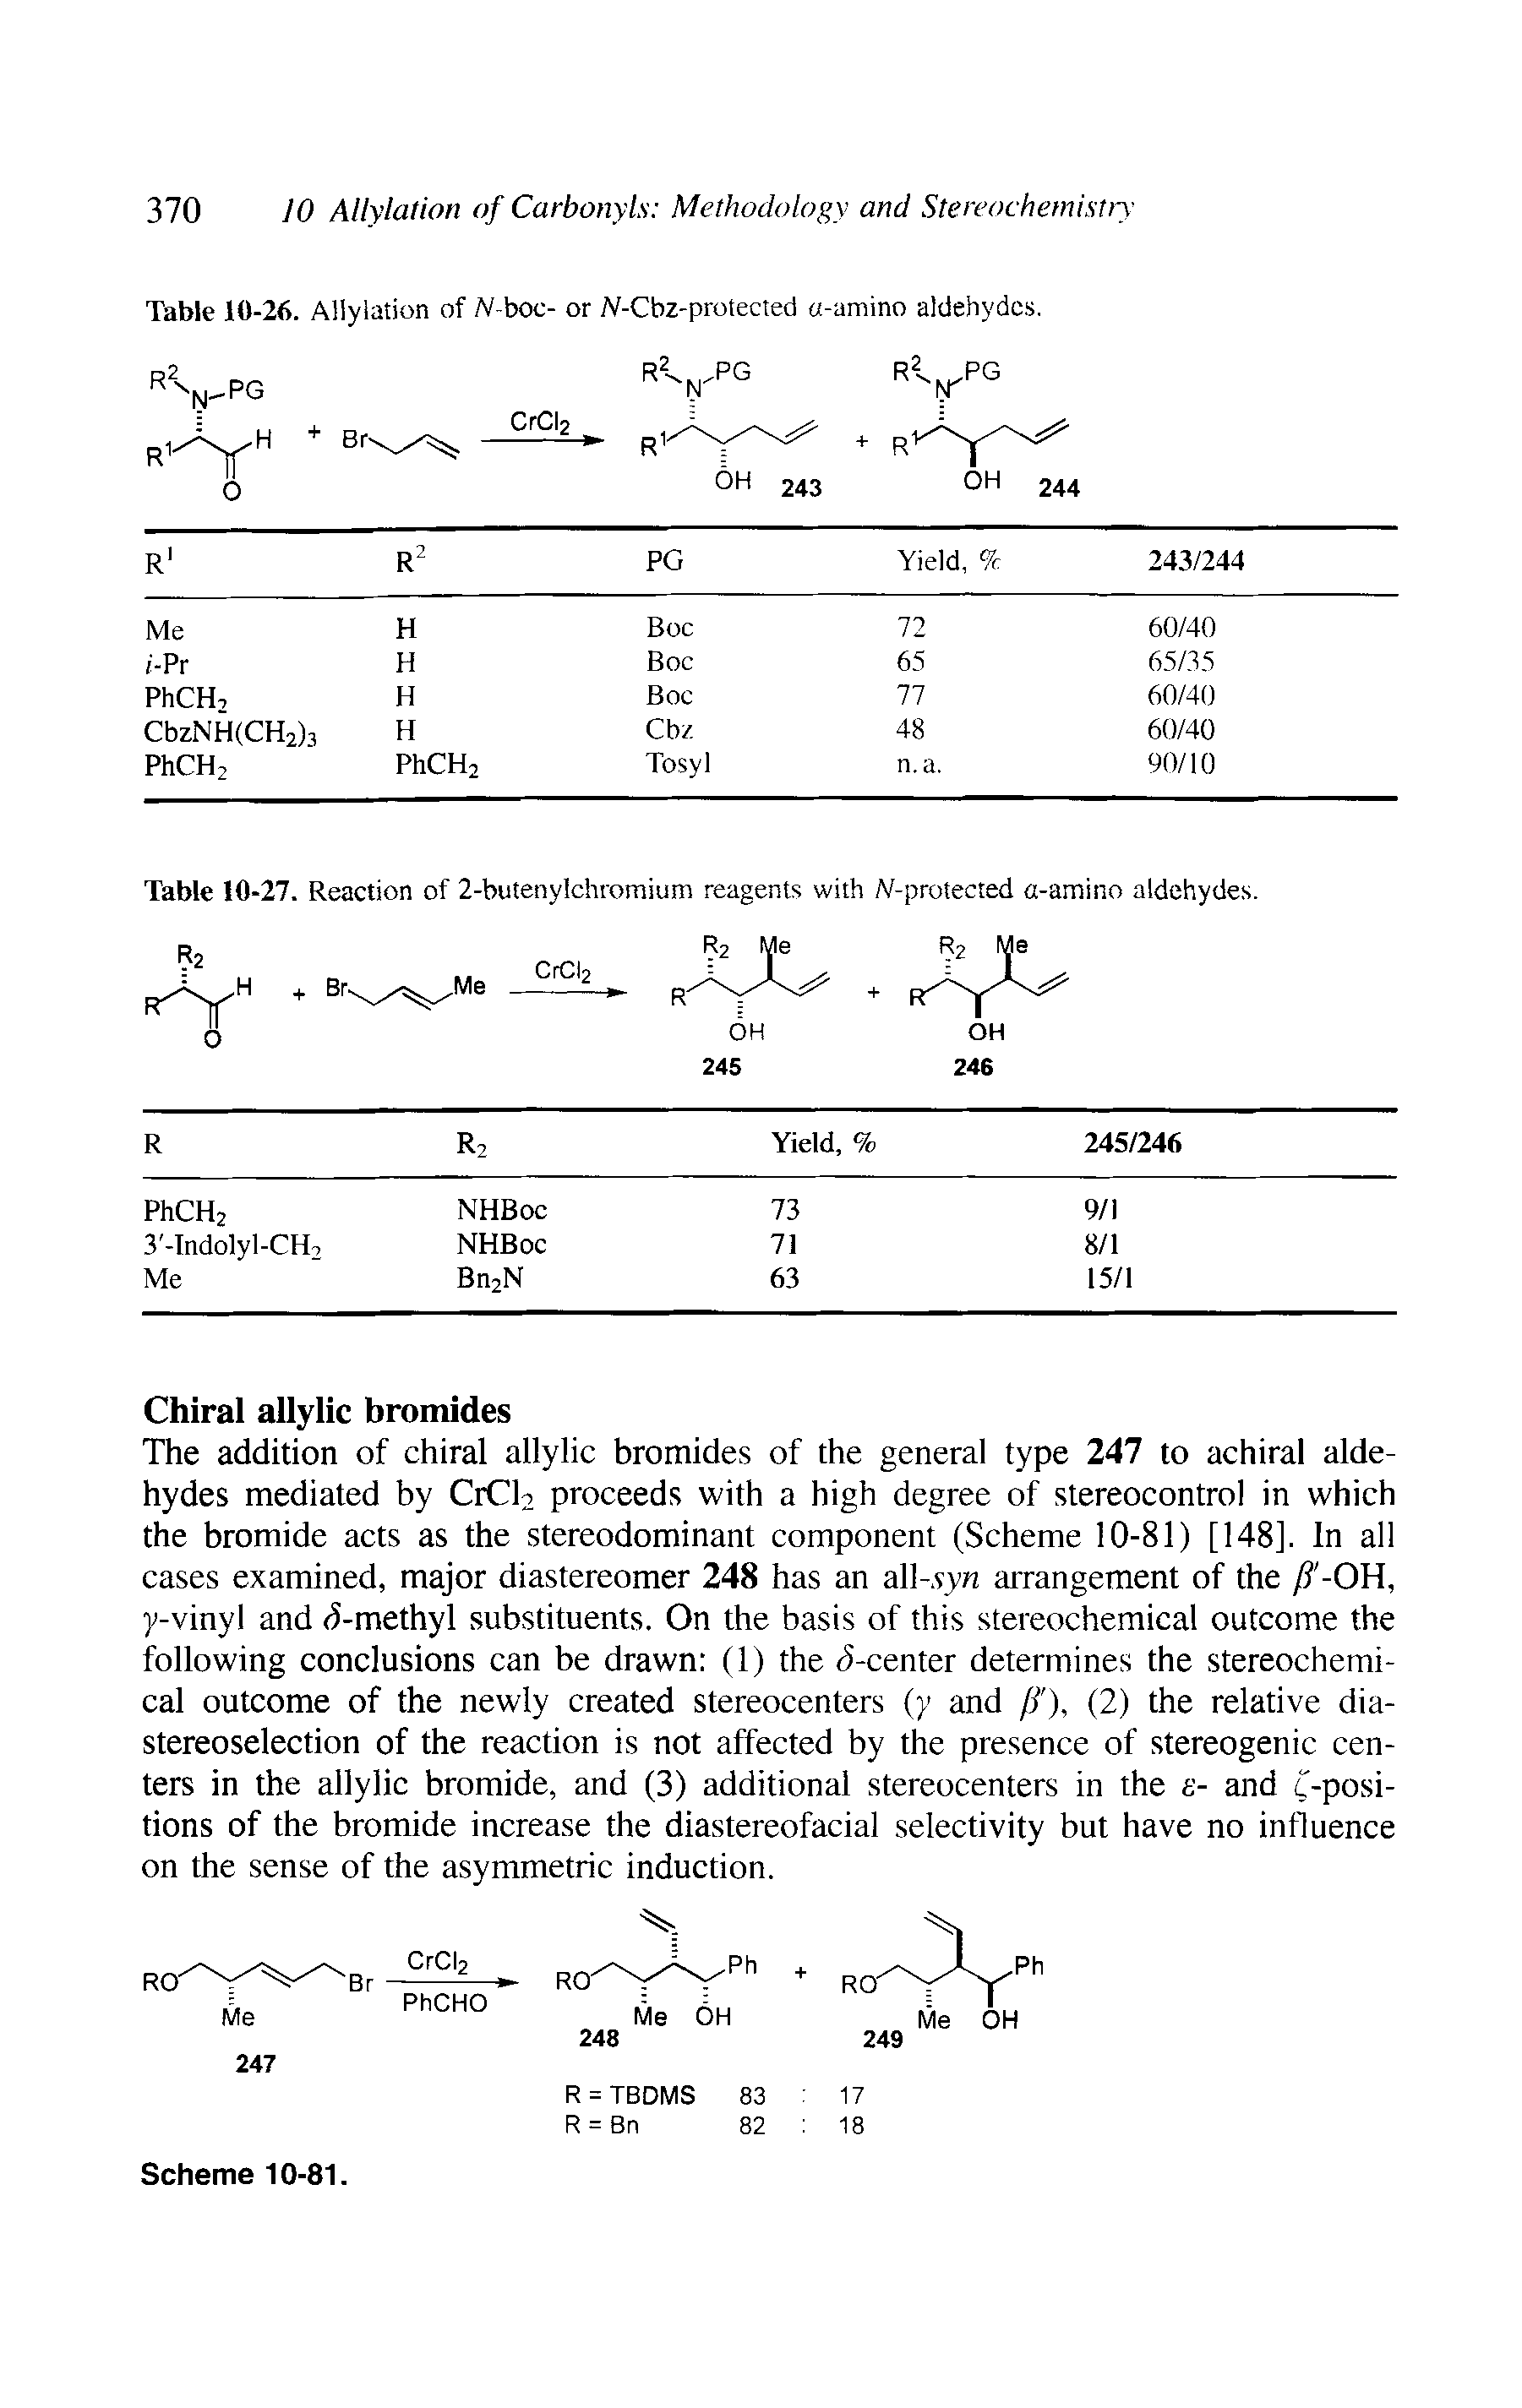 Table 10-27. Reaction of 2-butenylchromium reagents with W-protected a-amino aldehydes.